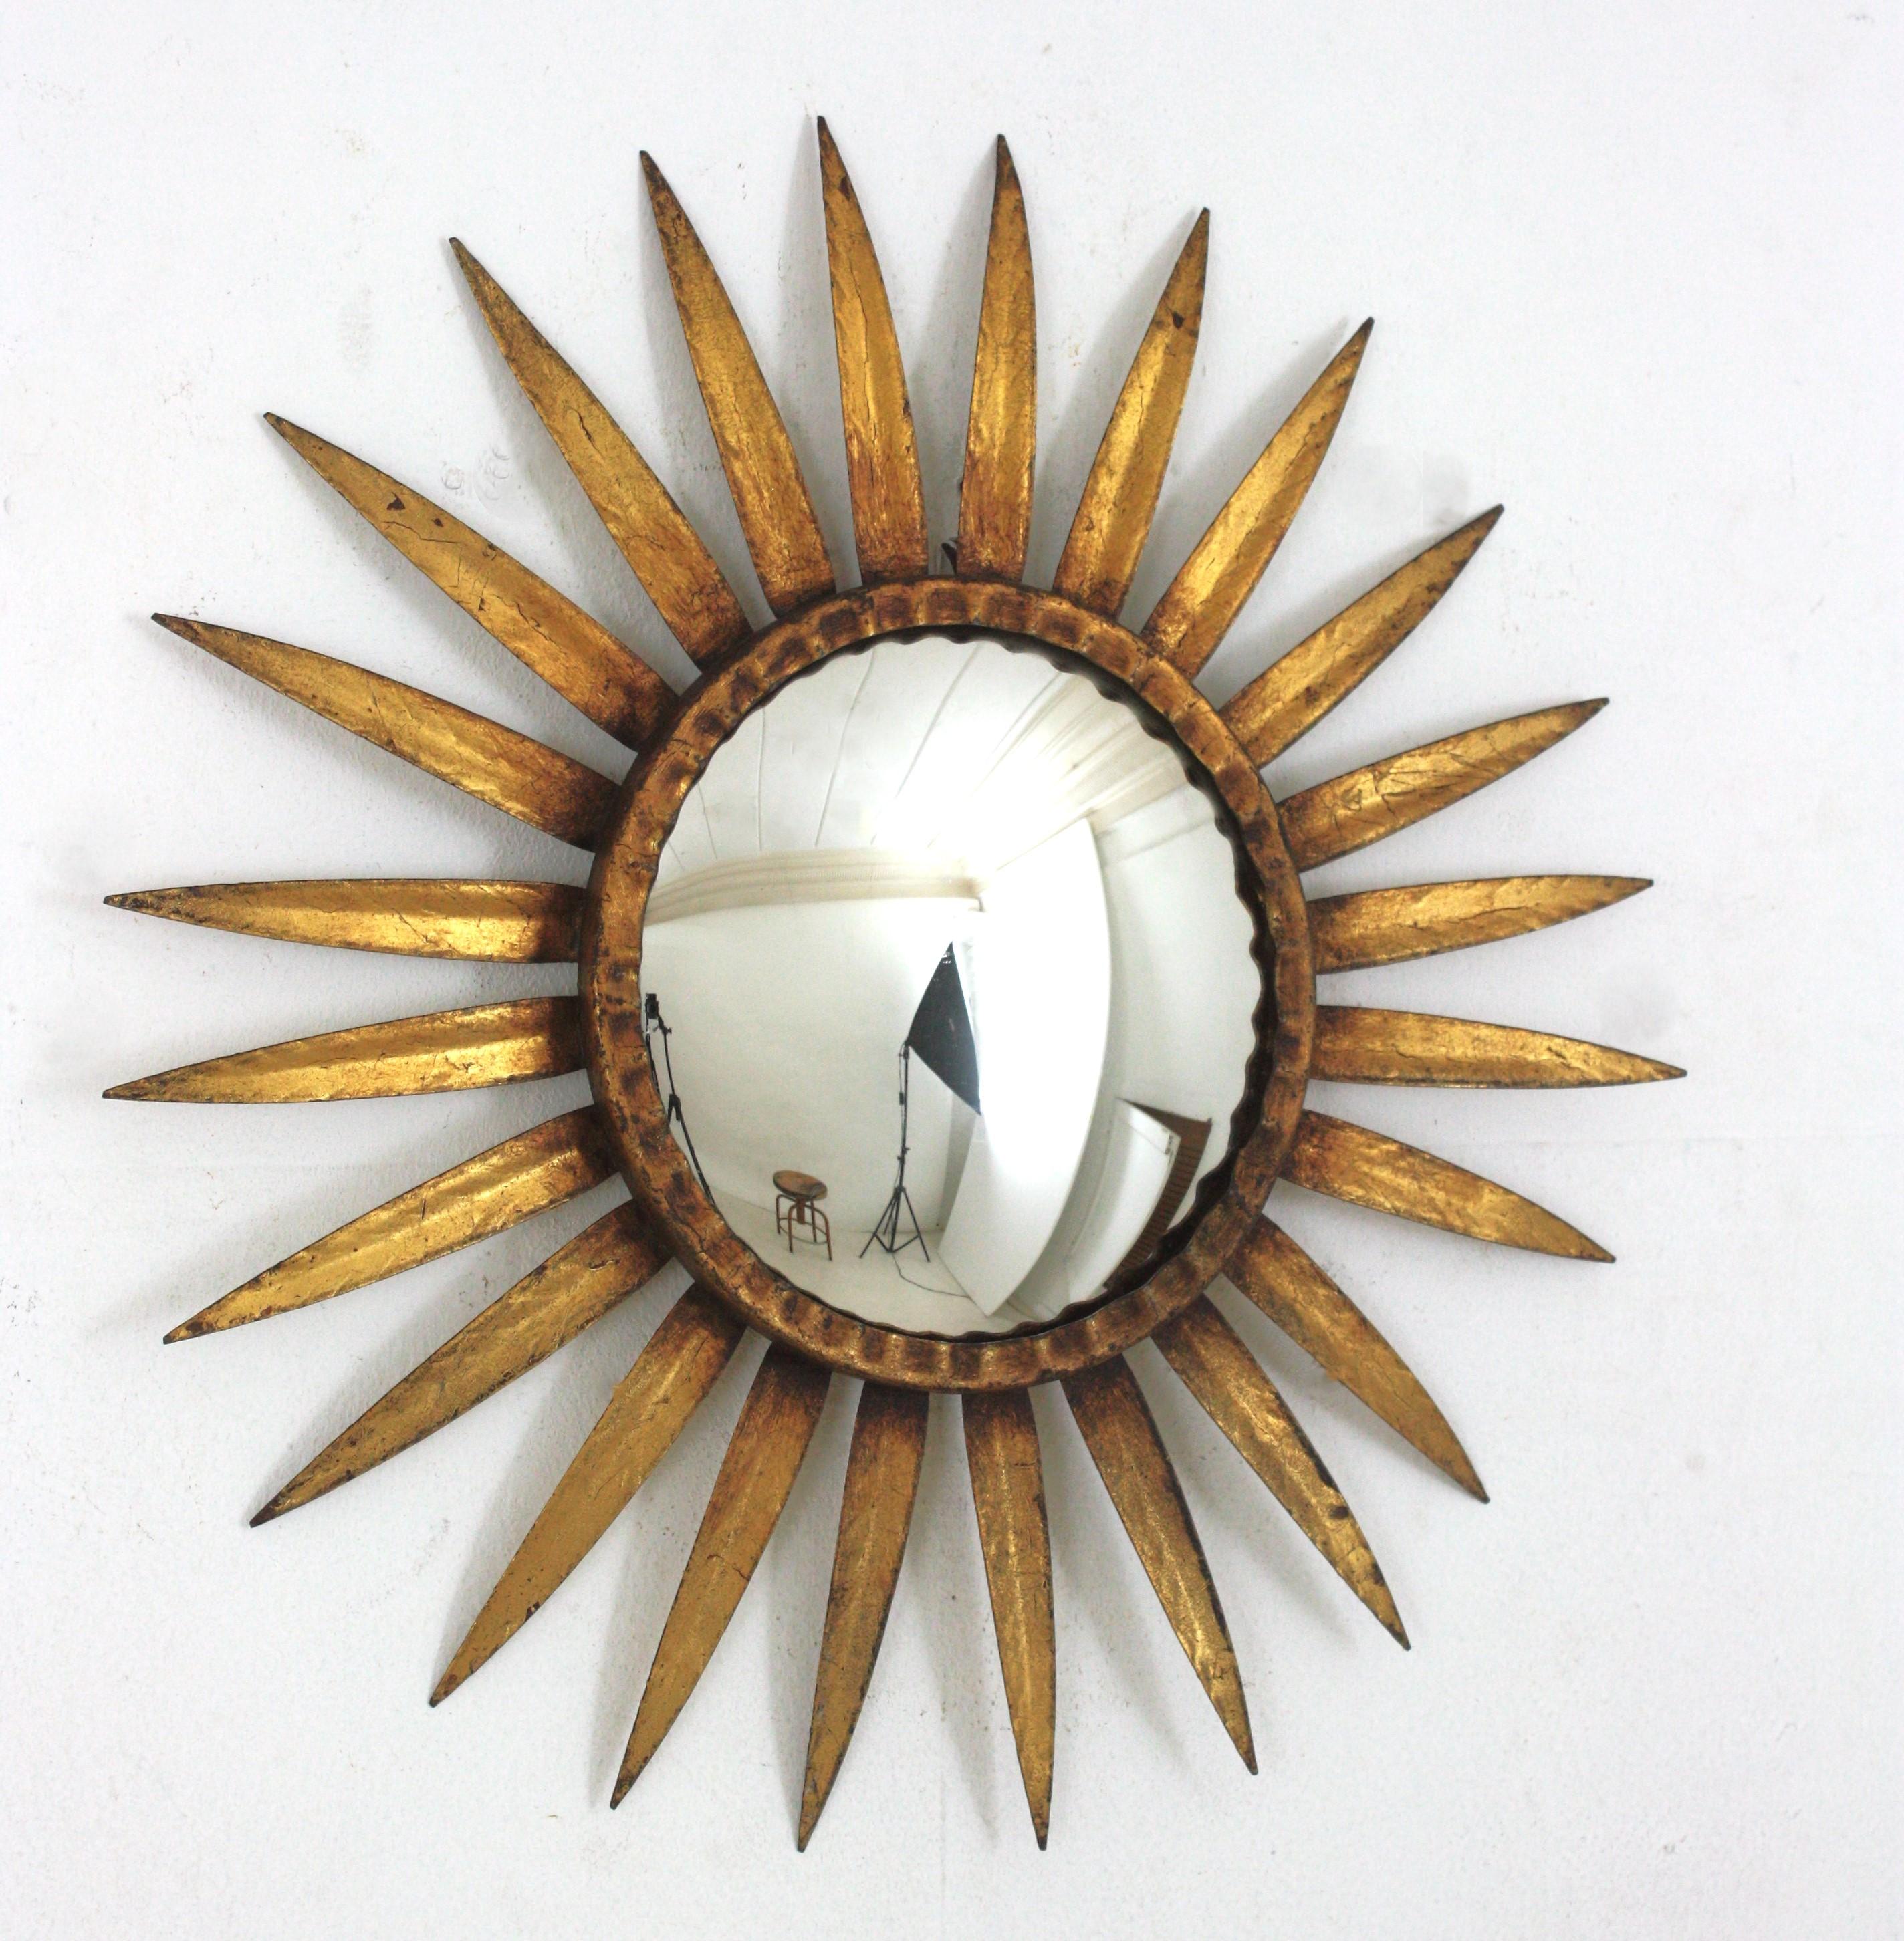 Convex Sunburst Mirror, Iron, Gold Leaf
Eye-catching Mid-Century Hollywood Regency sunburst mirror in gilt wought iron, Spain 1950s
Convex glass and gold leaf gilding. It has a terrific aged patina showing its original gilding.
Gorgeous placed alone